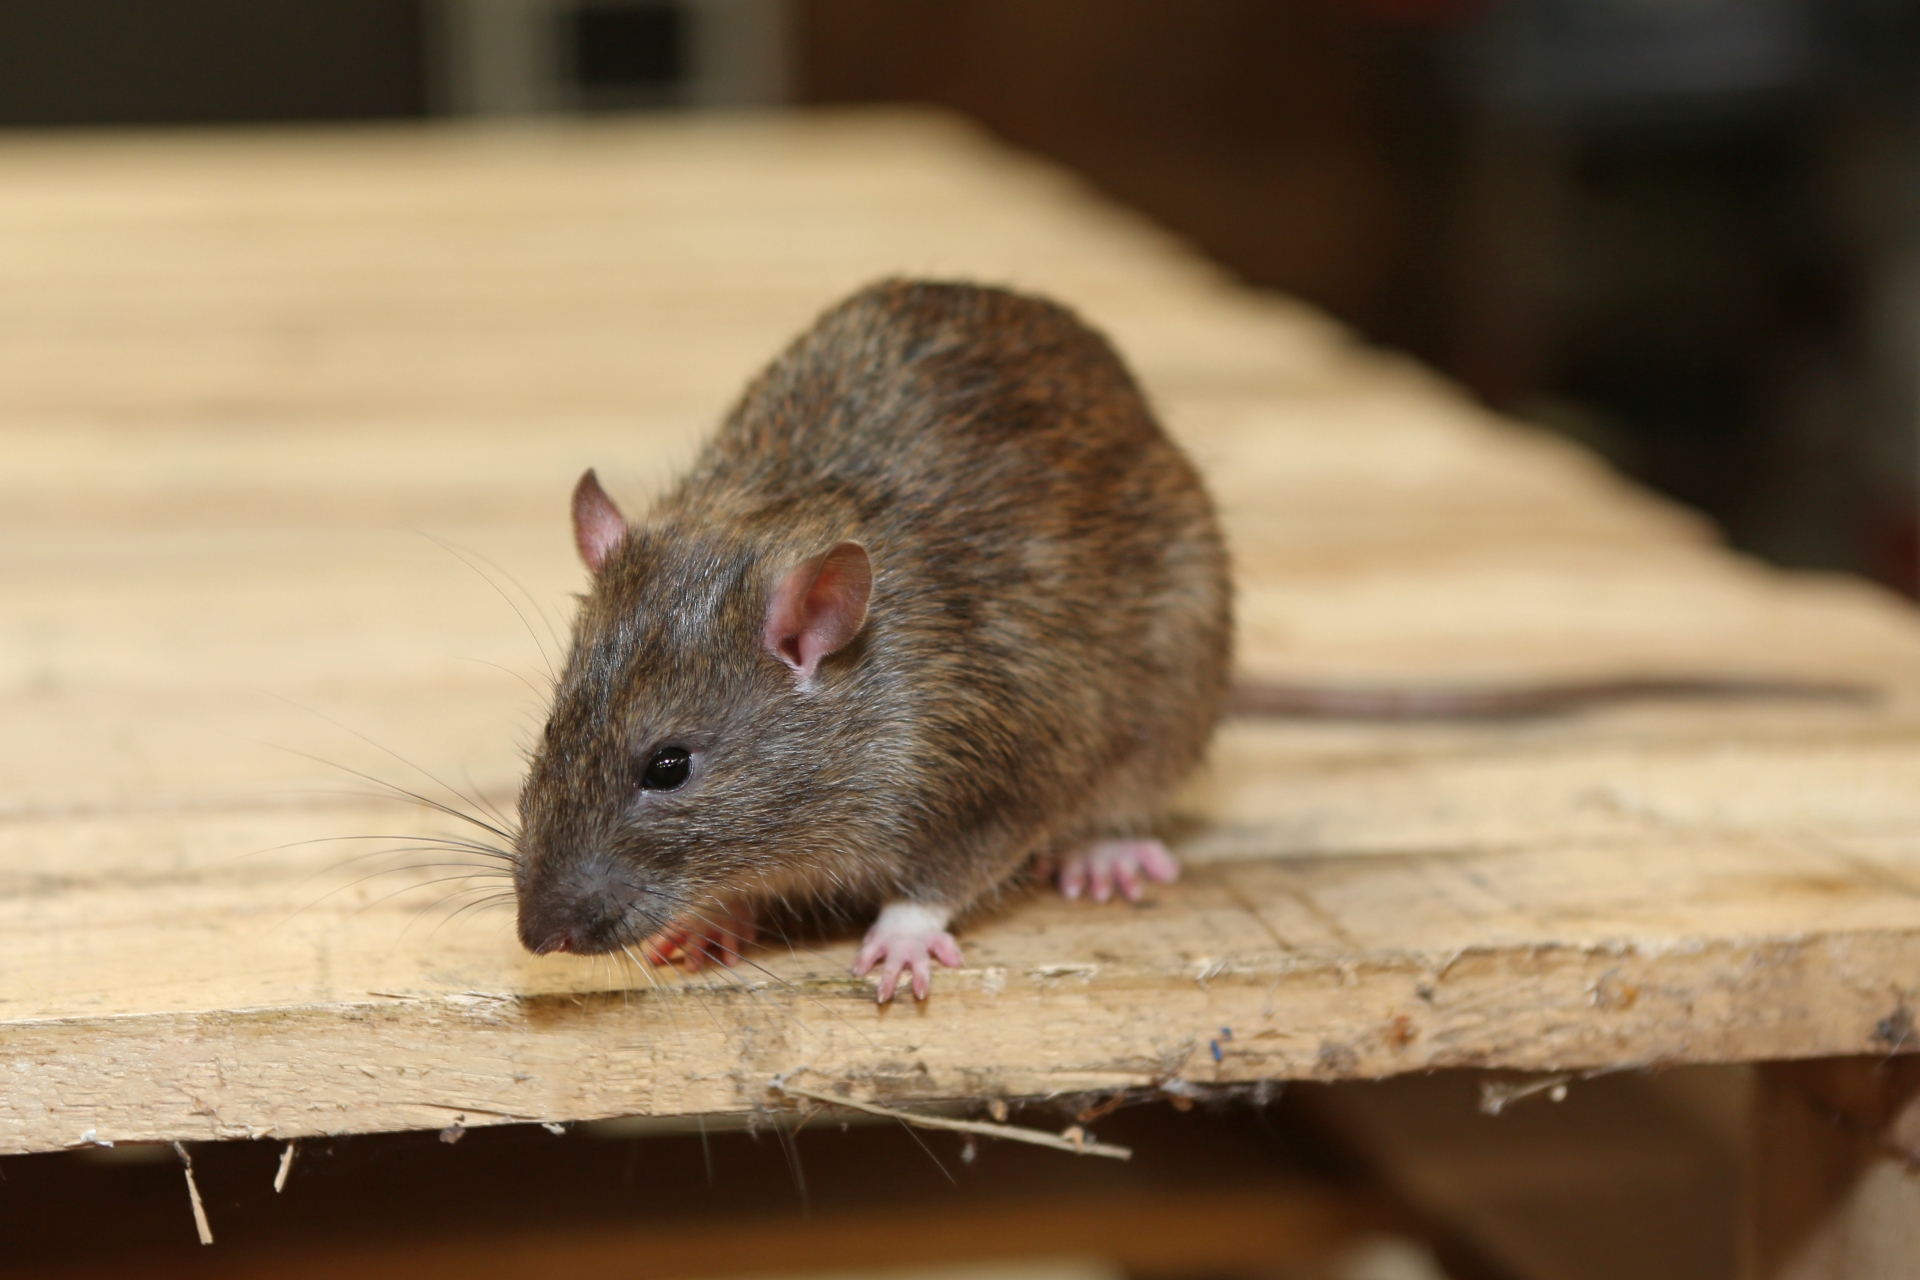 Rat Control, Pest Control in Chessington, Hook, KT9. Call Now 020 8166 9746